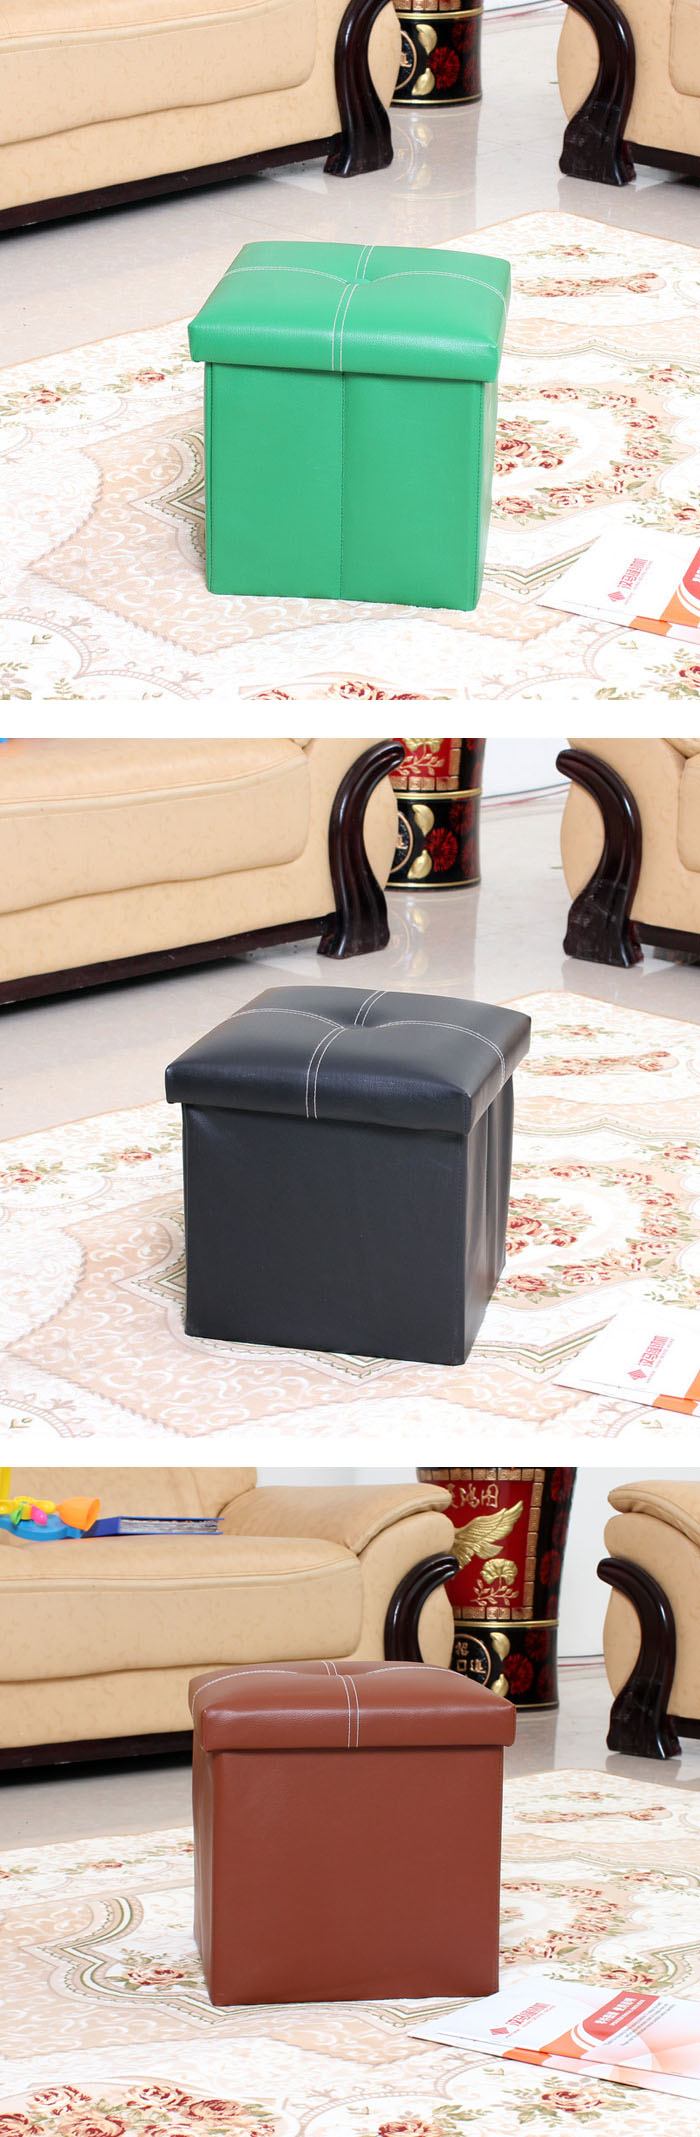 Multifunctional Folding Storage Chair Box Shoes Toys Storage Chair Home Furniture